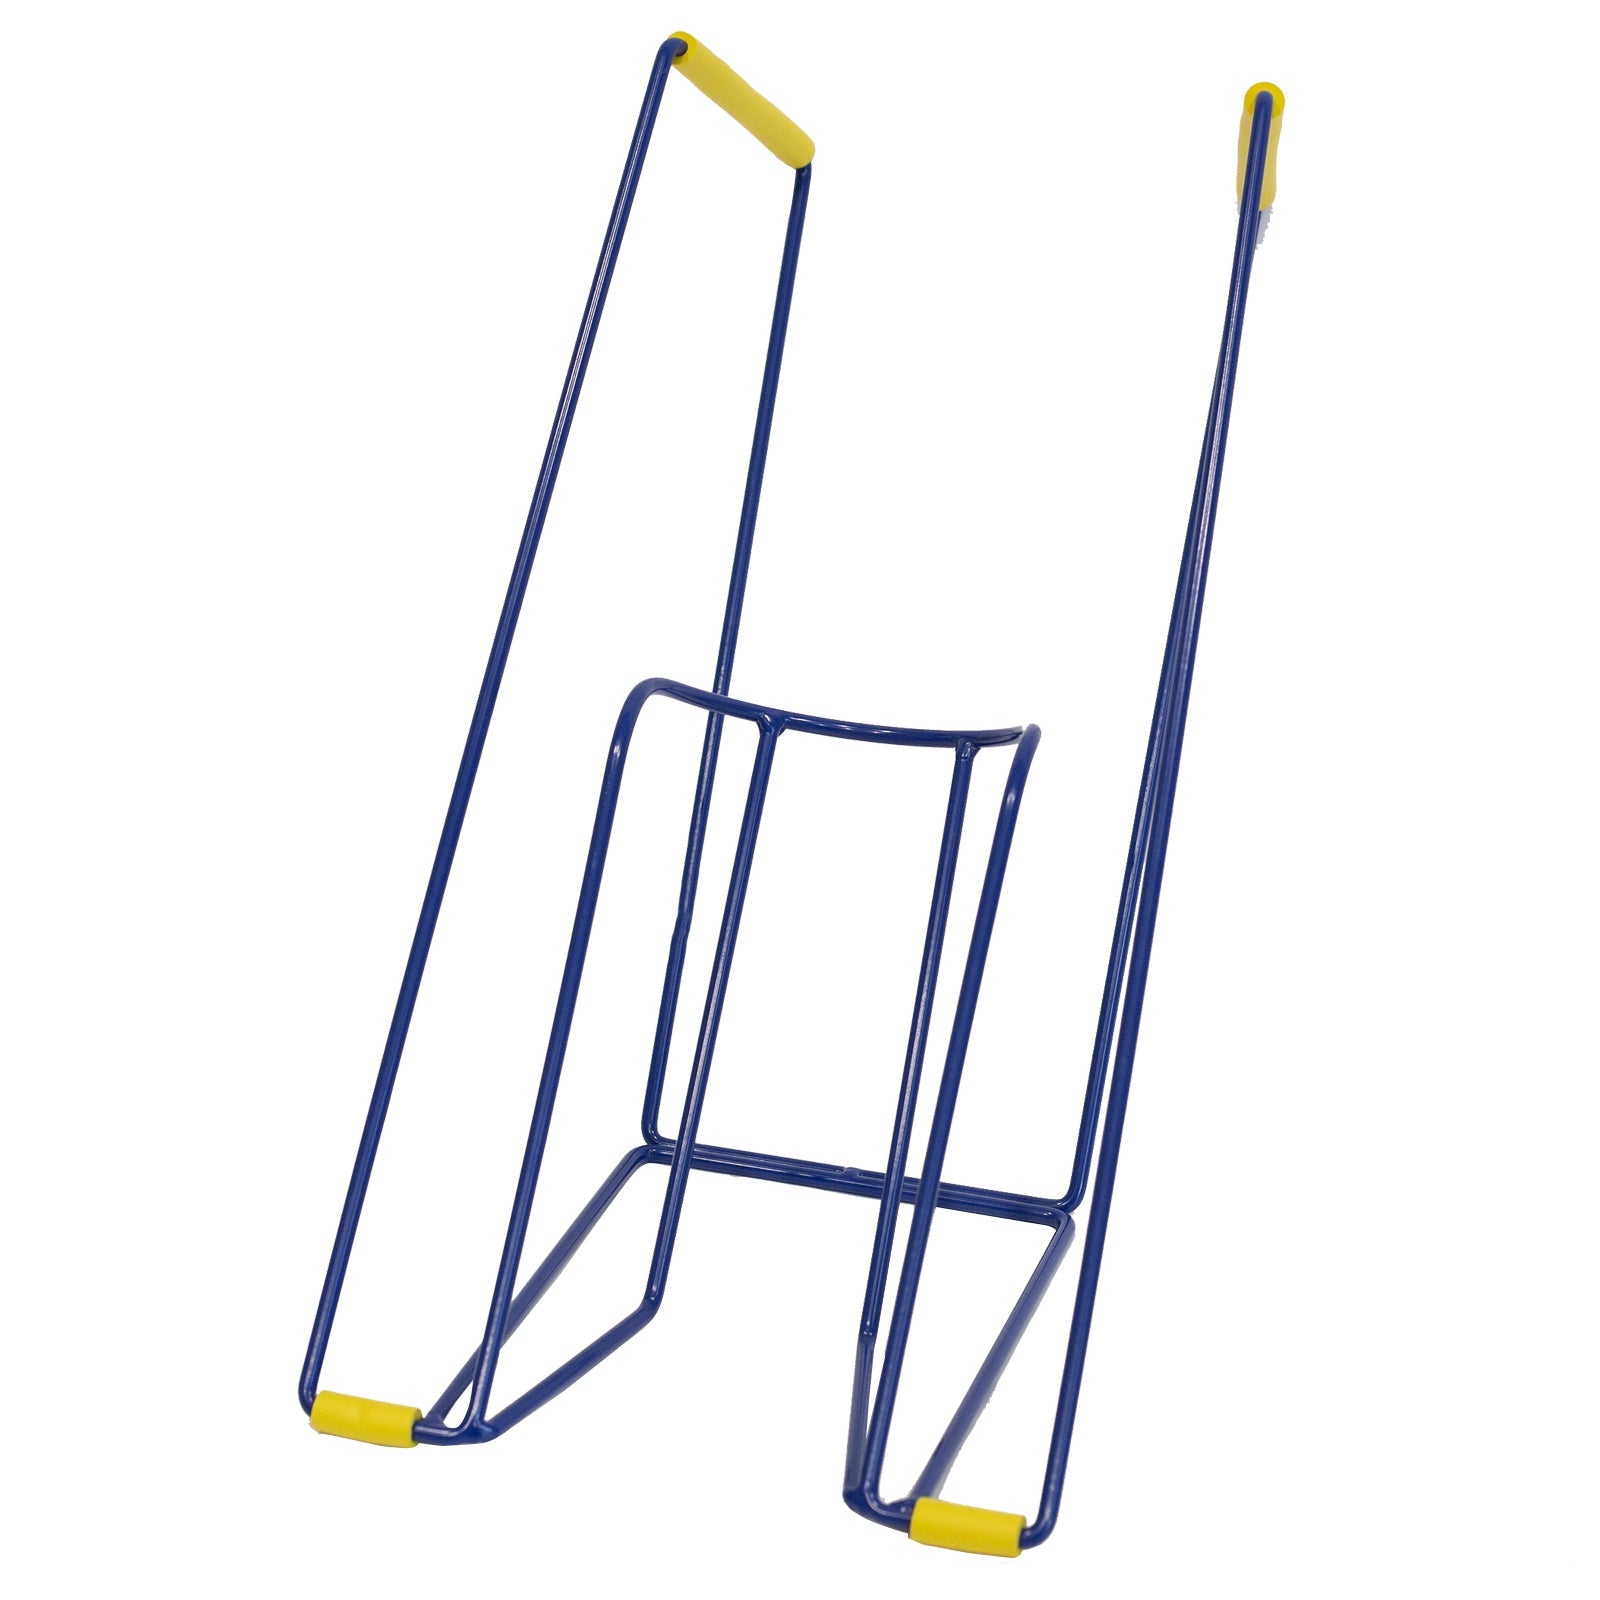 Tall sock and stocking aid frame - VAT Free